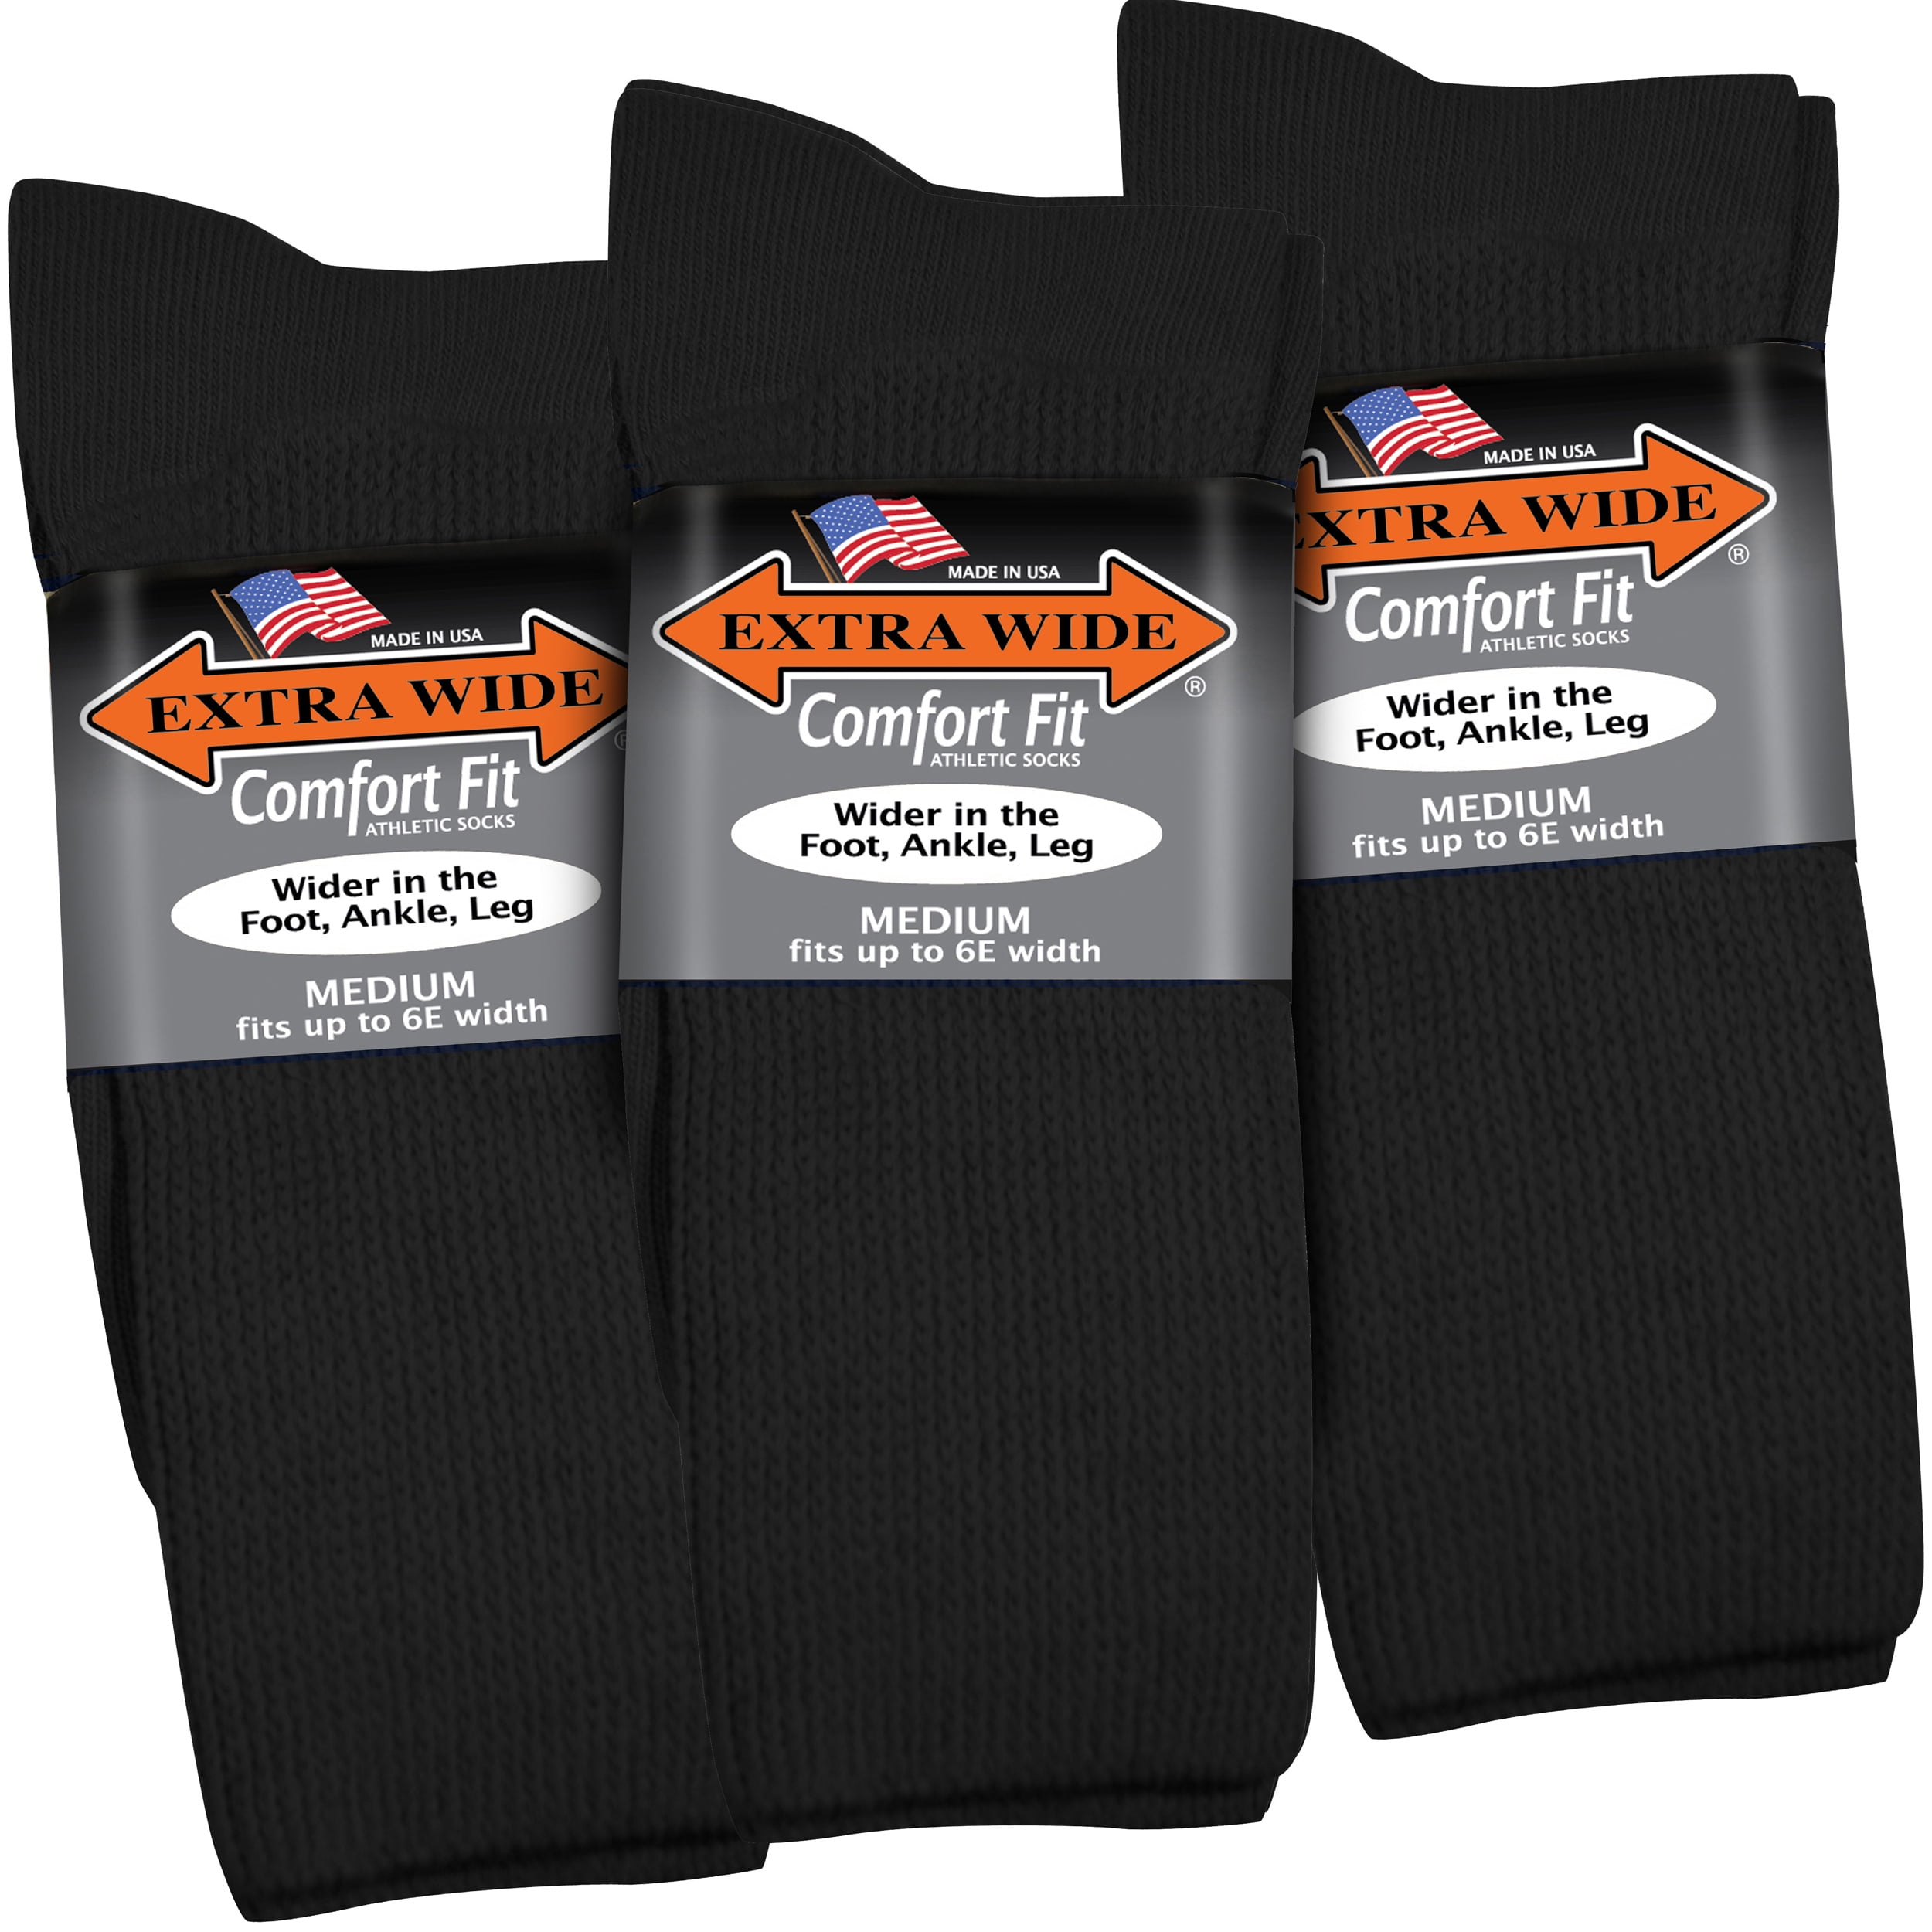 Extra Wide Comfort Fit Athletic Crew (Mid-Calf) Socks for Men - Black -  Size 8.5-11.5 (up to 6E wide) - 3PK